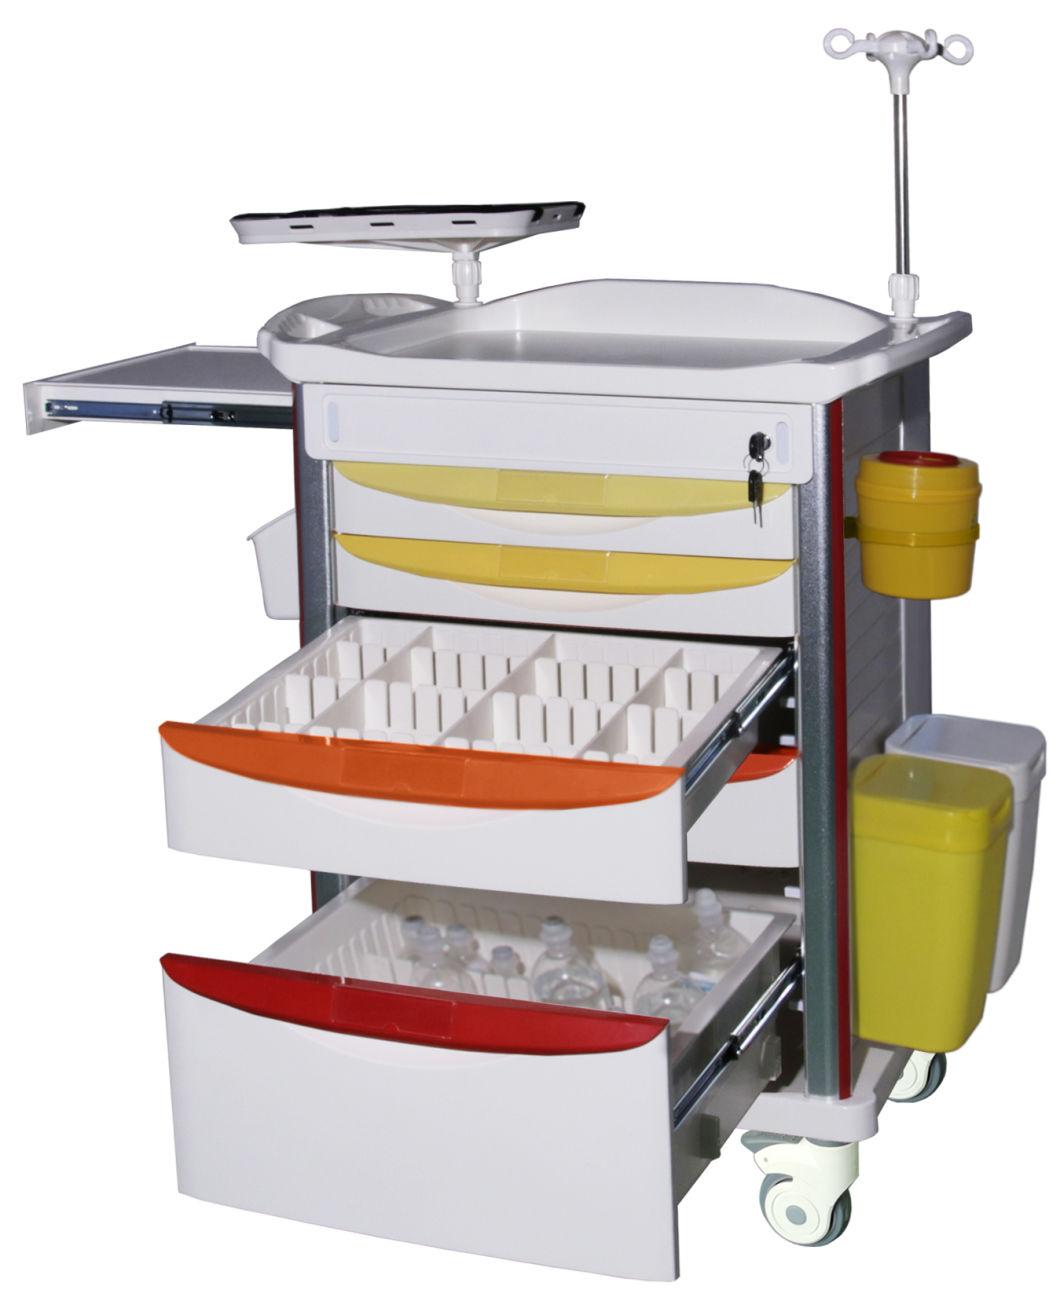 Mn-Ec007 Utility Crash Truck Hospital Furniture Emergency Medication Trolley Made Of Stainless Steel